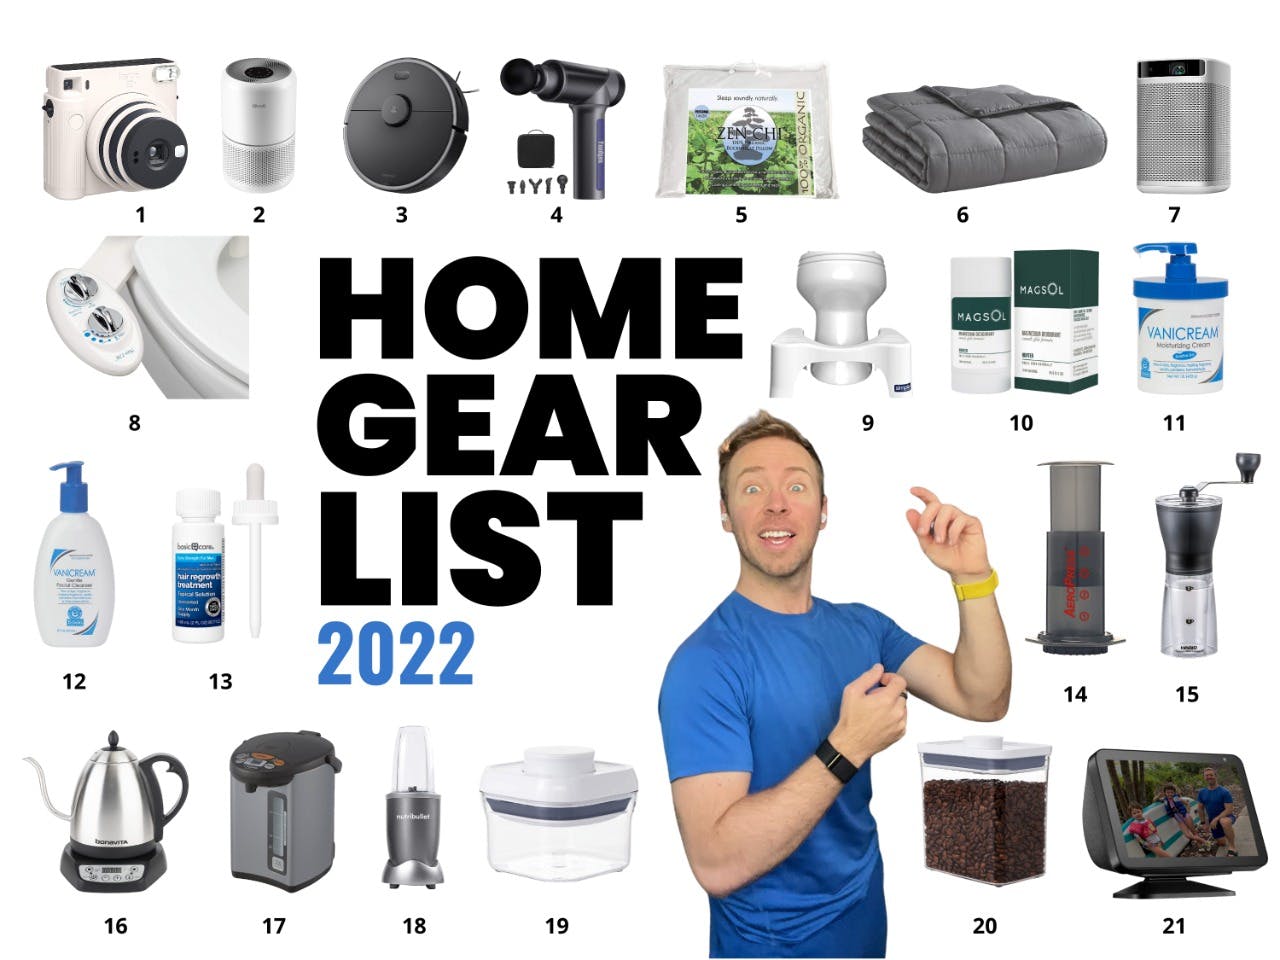 Nick with a ton of product icons and text that says HOME GEAR LIST 2022